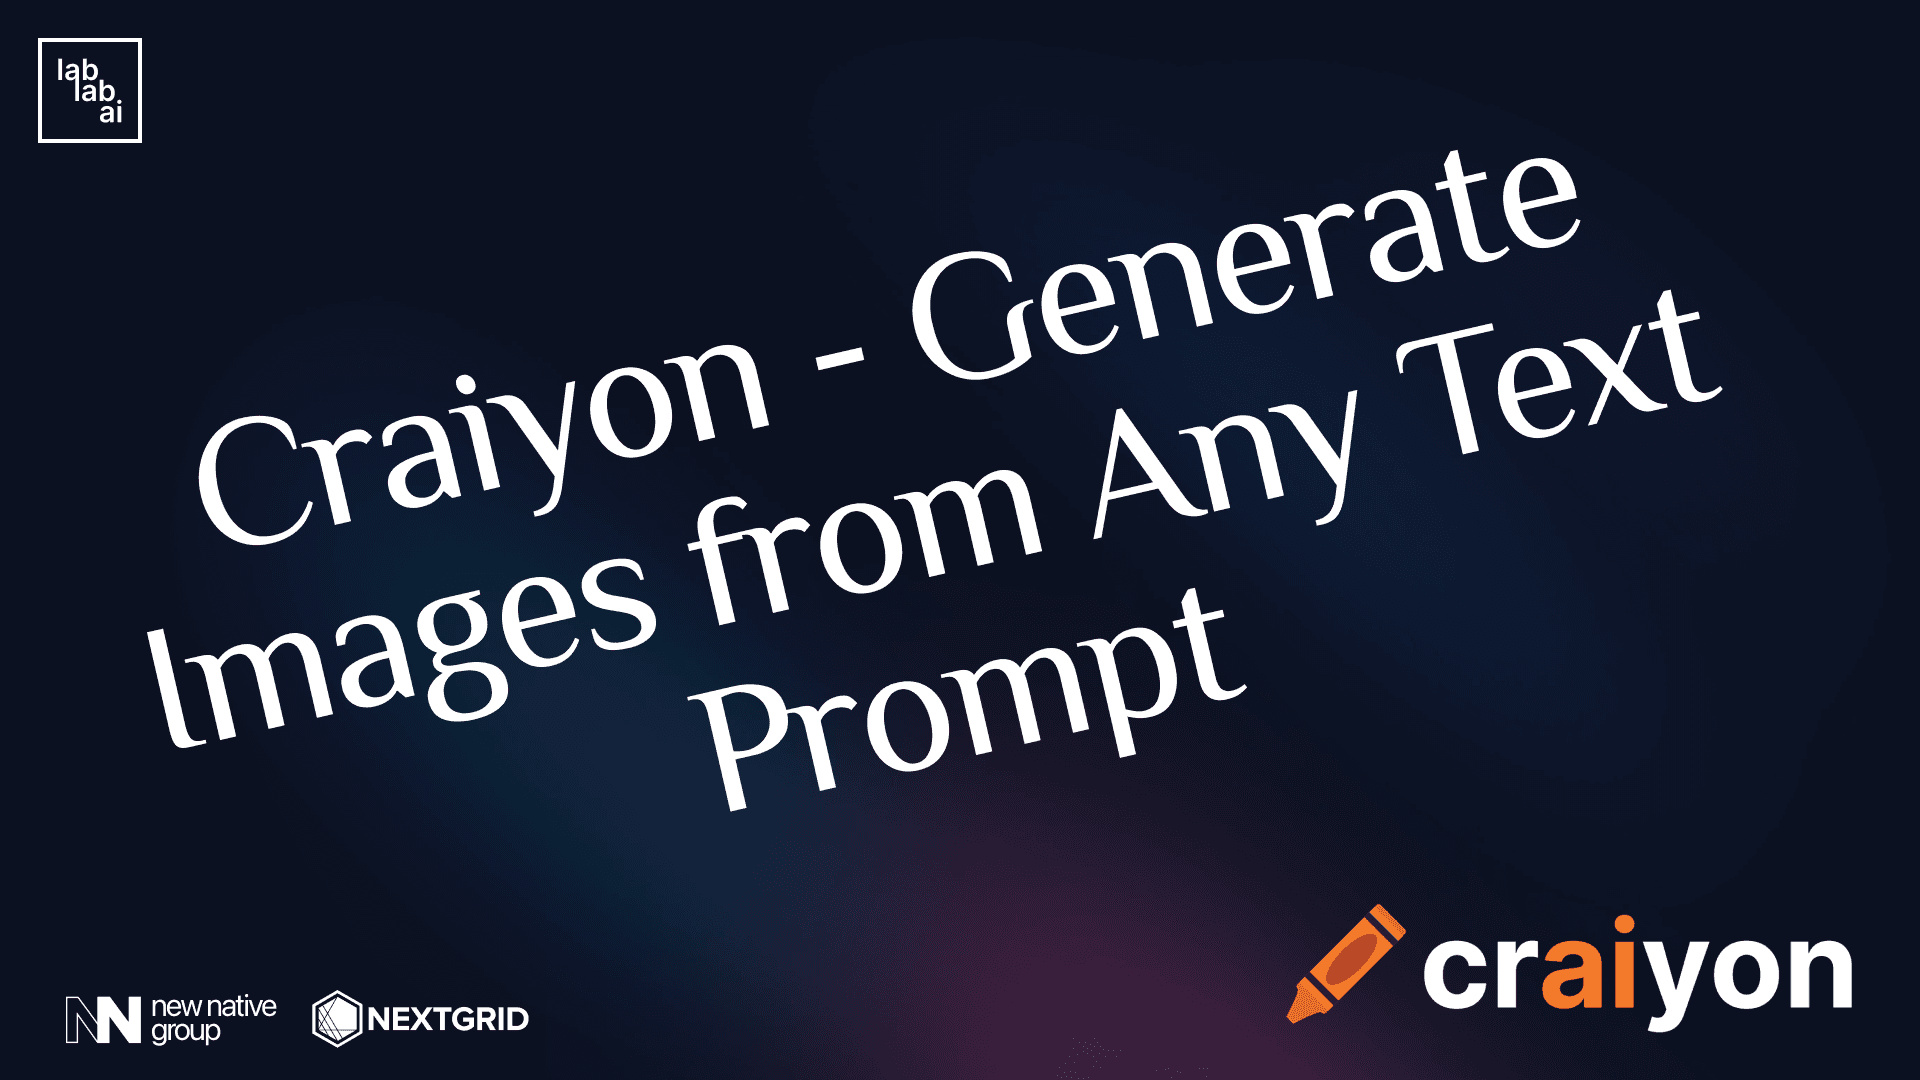 Free AI art Generator tutorial: Craiyon - Generate Images From Any Text Prompt